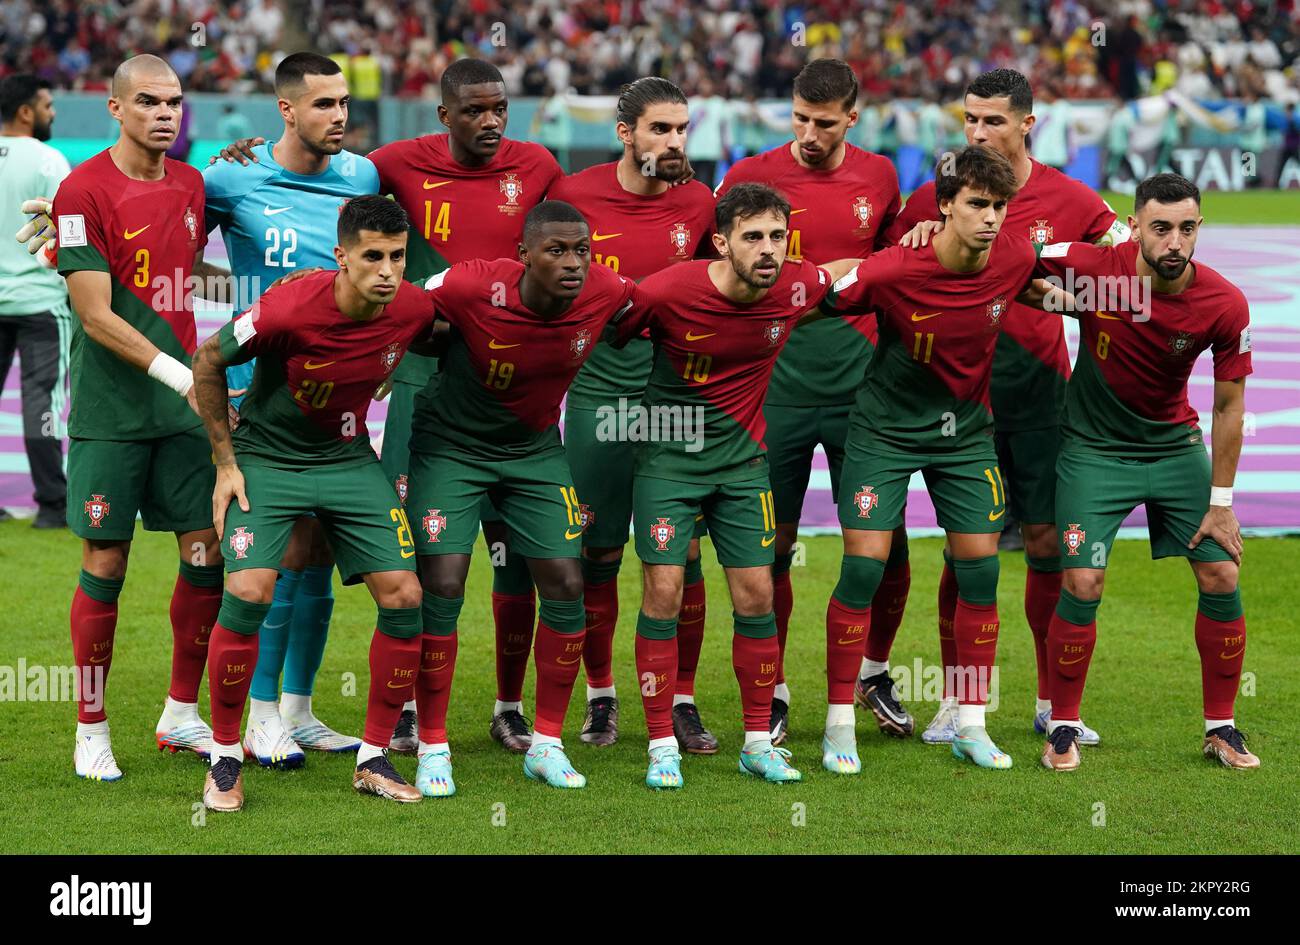 Portugal players, back row, left to right, Pepe, Diogo Costa, William Carvalho, Ruben Neves, Ruben Dias, Cristiano Ronaldo, front row, left to right, Joao Cancelo, Nuno Mendes, Bernardo Silva, Joao Felix and Bruno Fernandes line up before the FIFA World Cup Group H match at the Lusail Stadium in Lusail, Qatar. Picture date: Monday November 28, 2022. Stock Photo